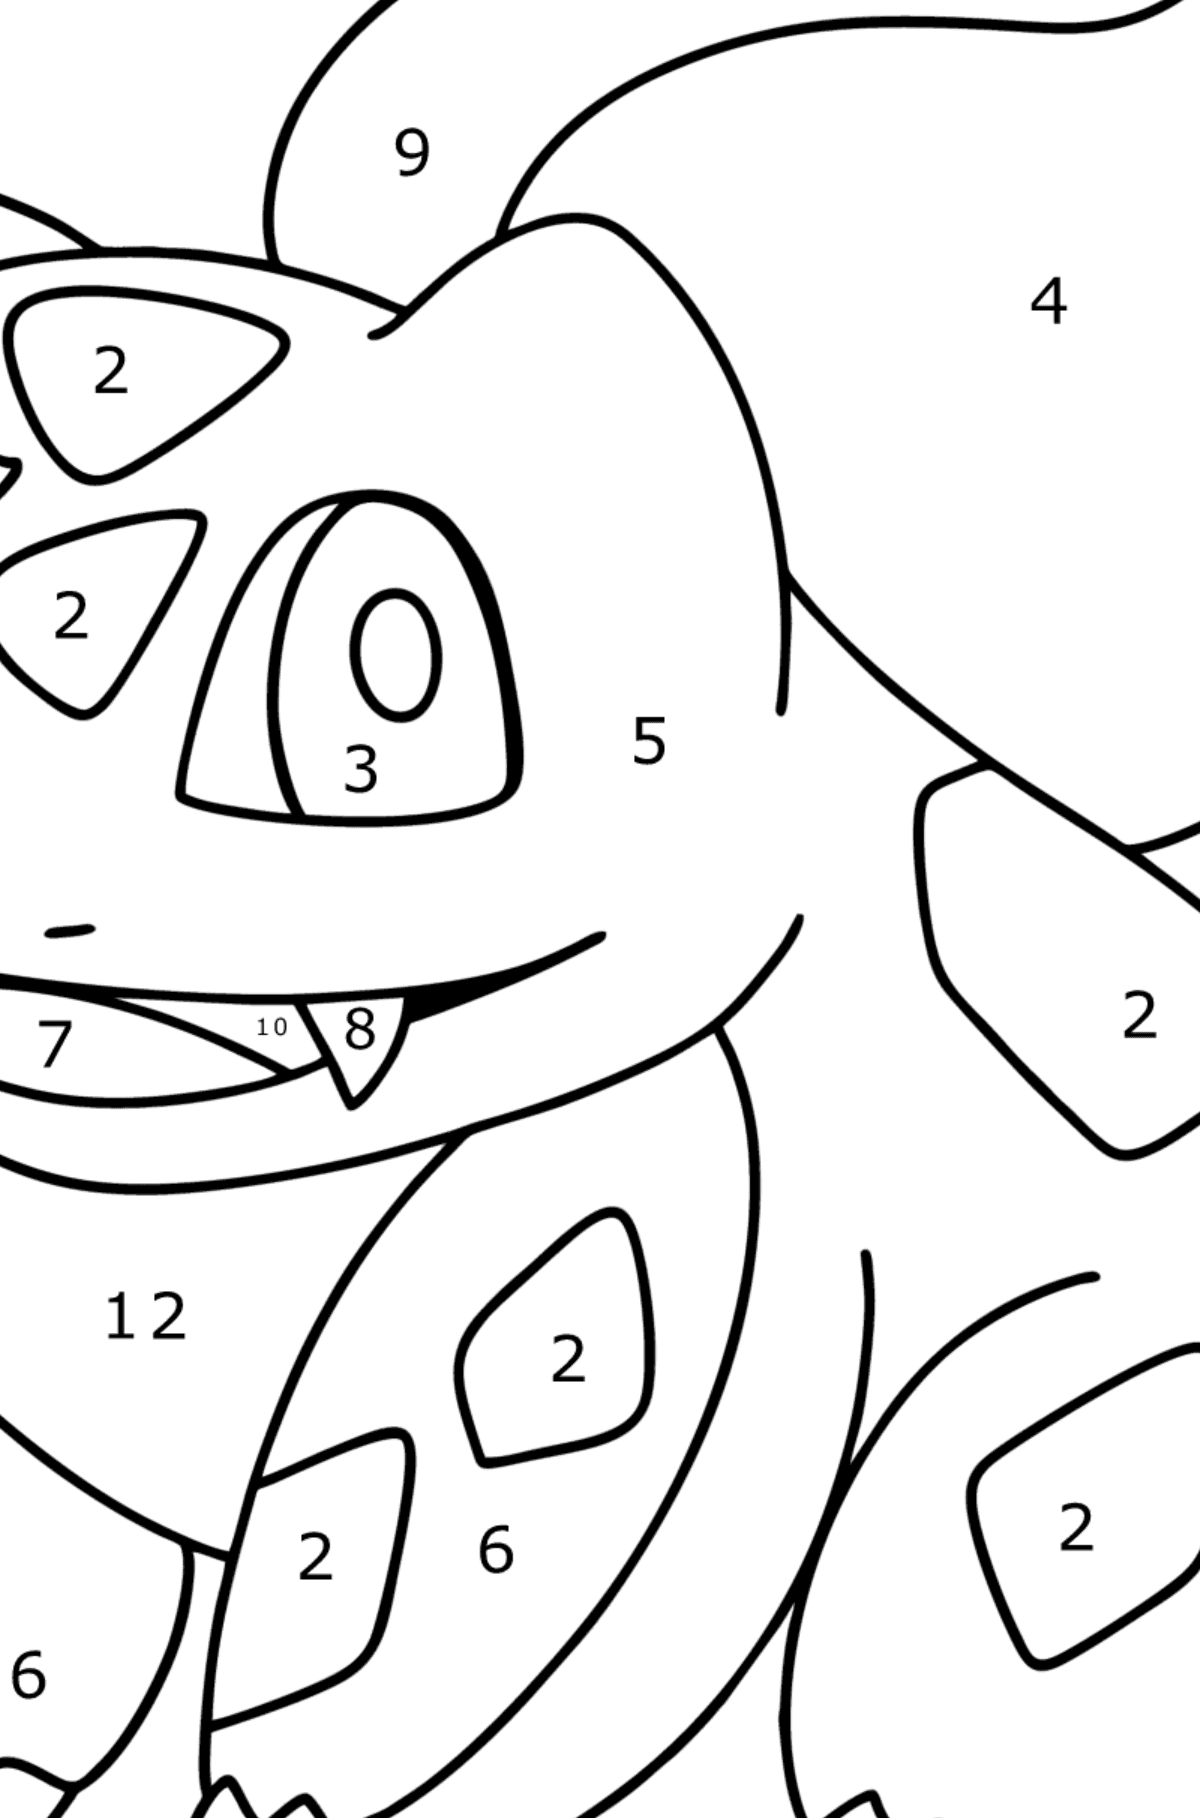 Pokémon Go Bulbasaur coloring page - Coloring by Numbers for Kids